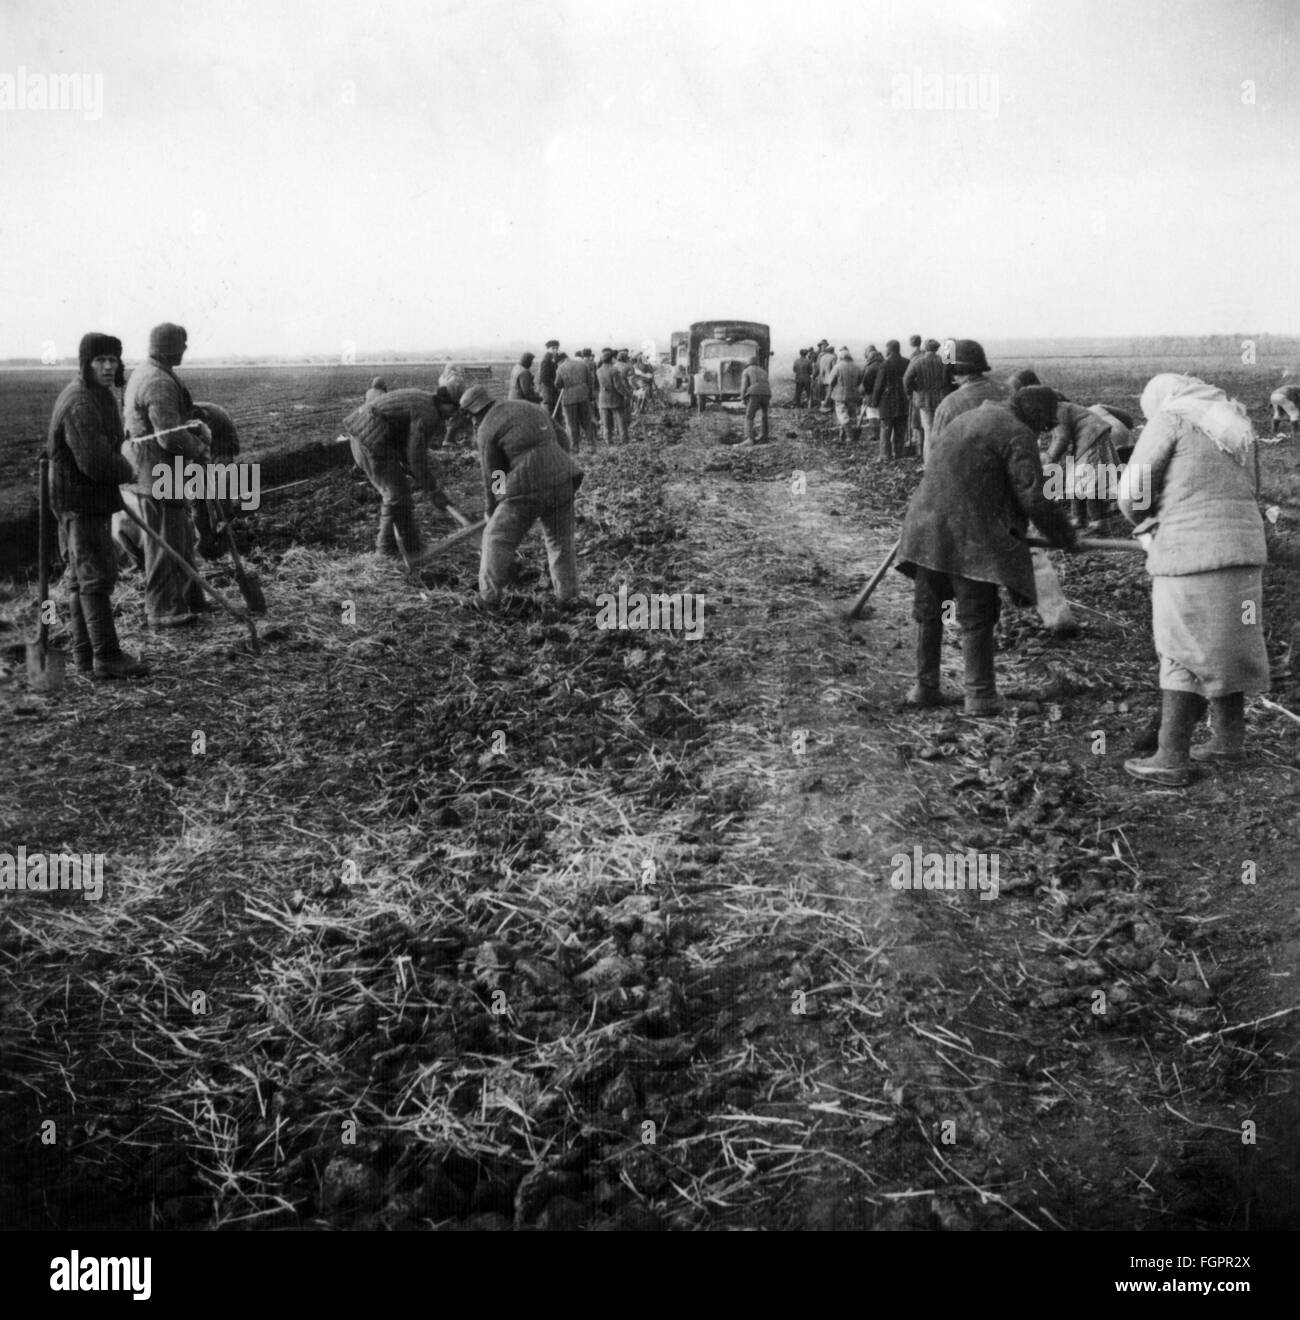 events, Second World War / WWII, Soviet Union, Soviet prisoners of war and civilians working on a country lane, photo taken by a member of the German Reich Labour Service (Reichsarbeitsdienst, RAD), Ukraine, 1941, Additional-Rights-Clearences-Not Available Stock Photo